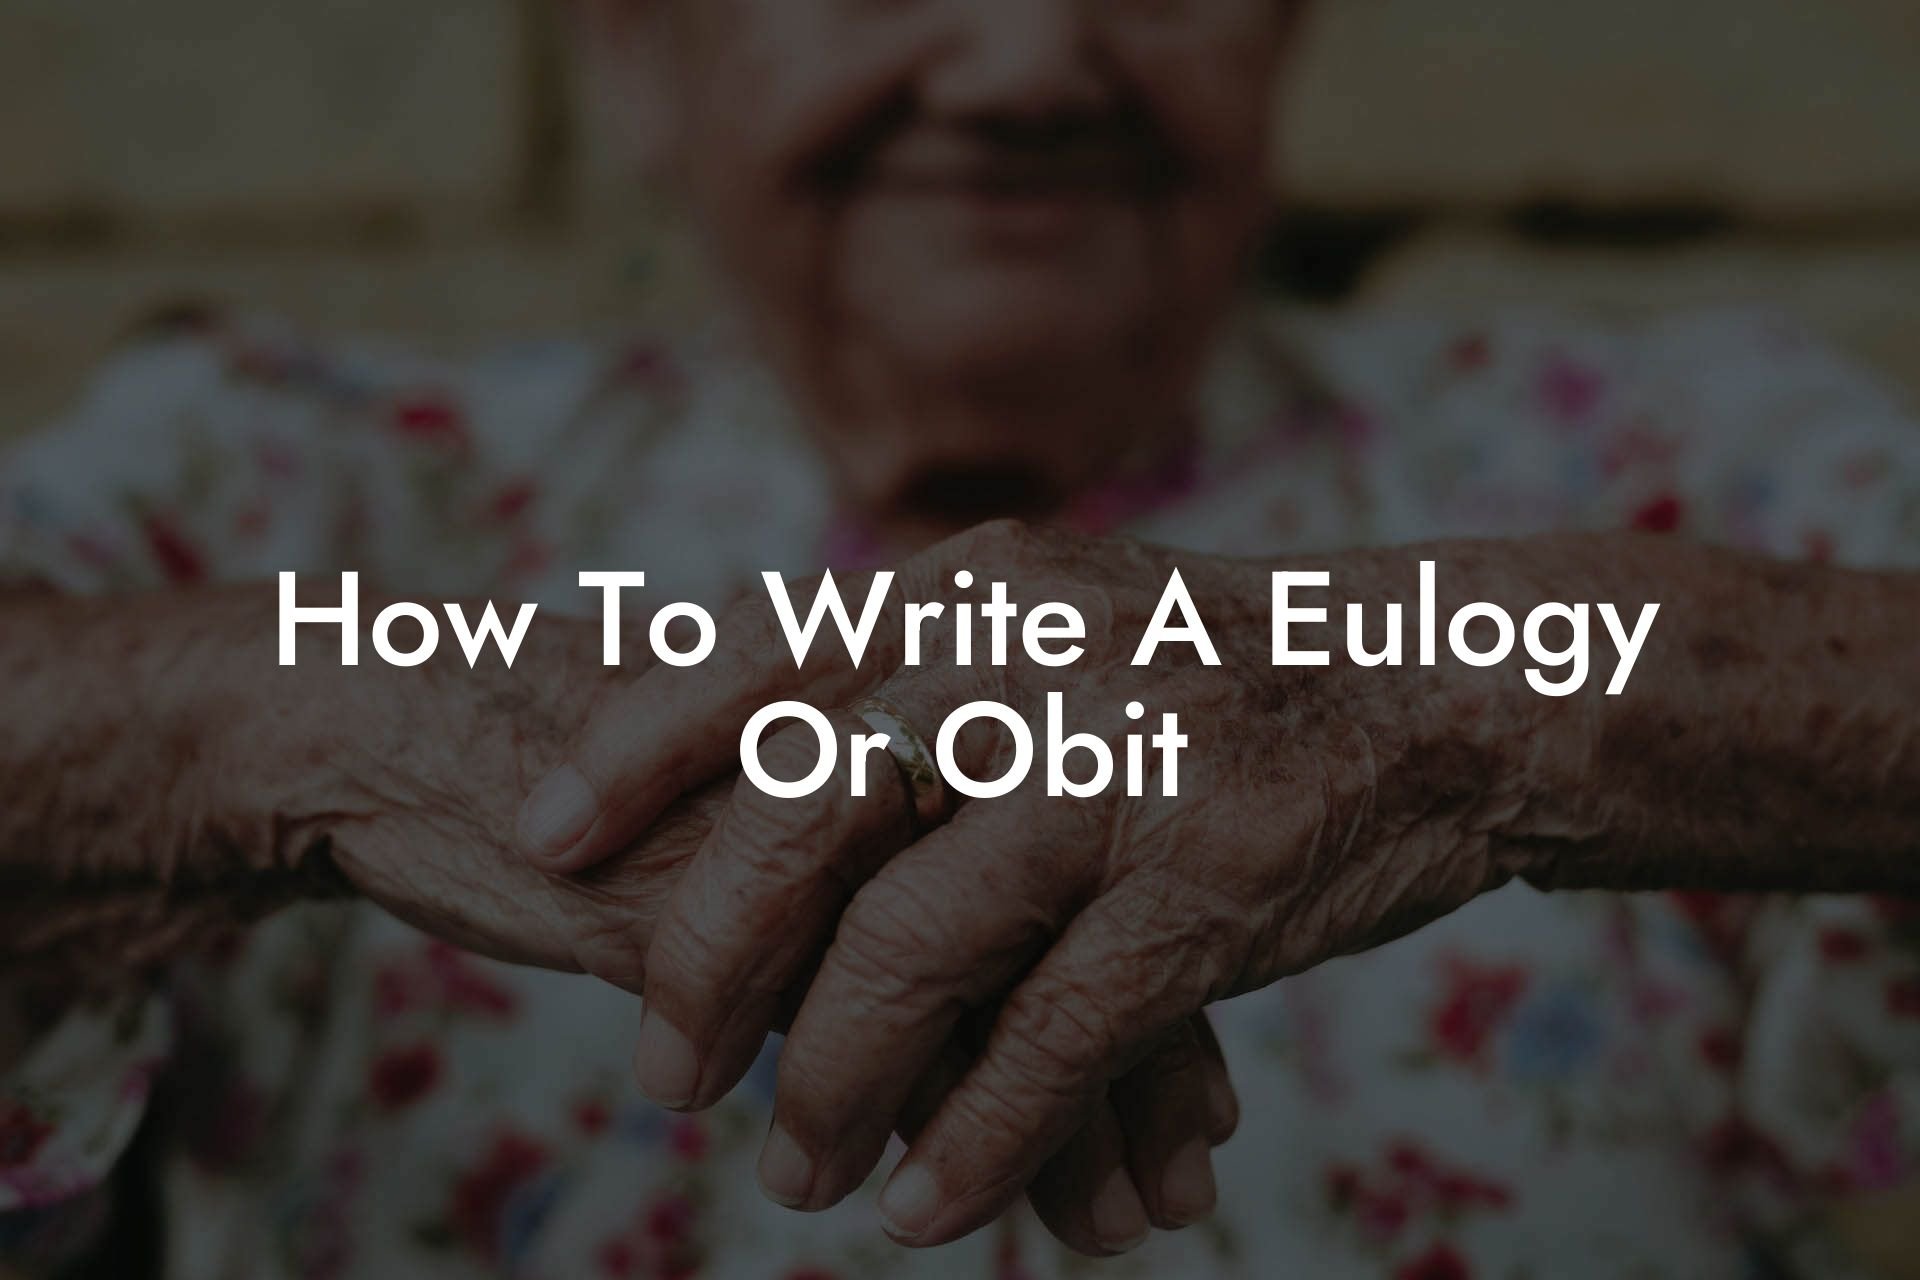 How To Write A Eulogy Or Obit